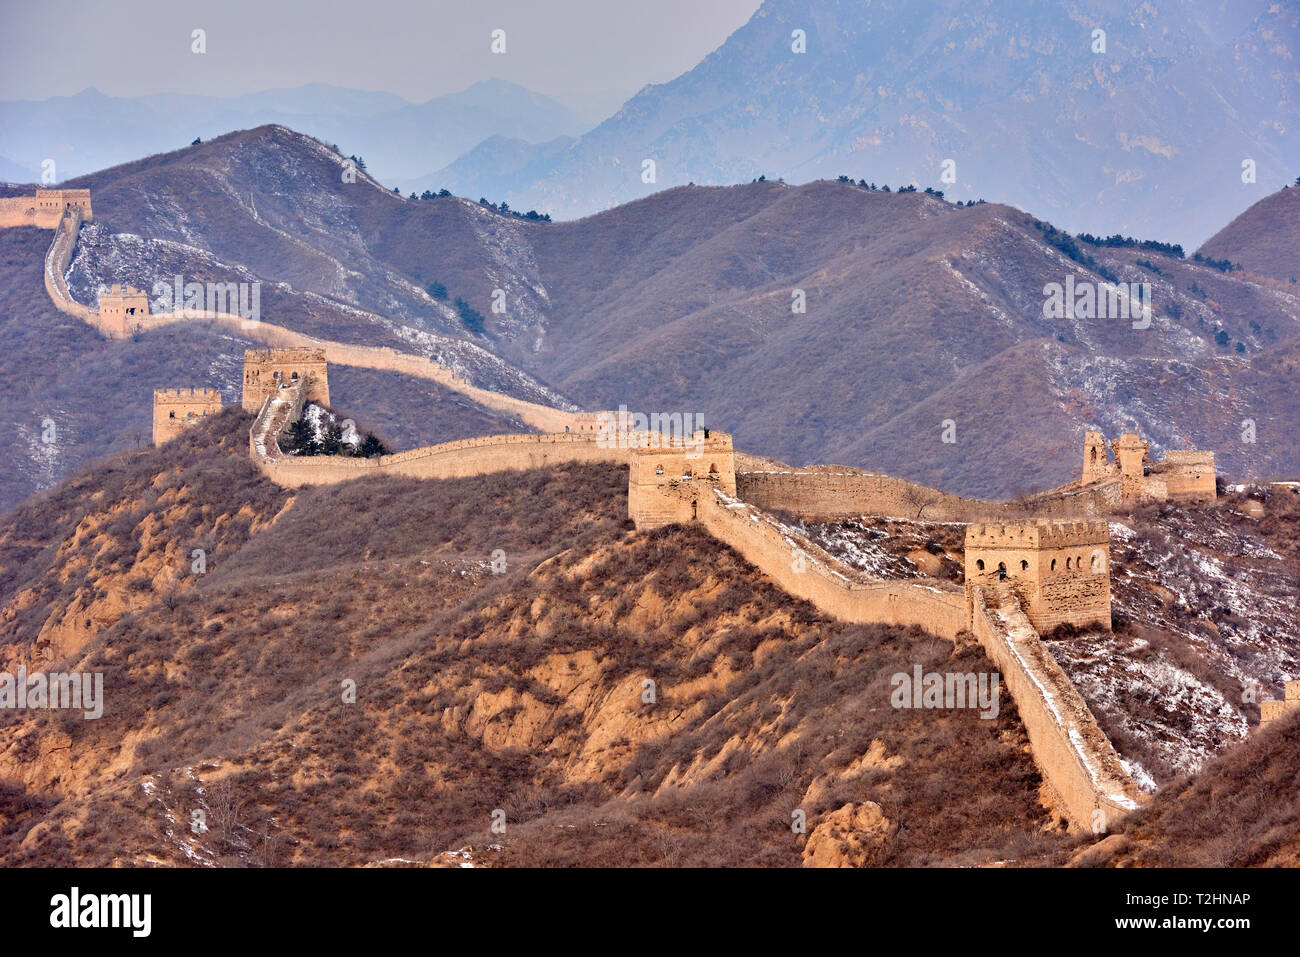 Elevated view of the Jinshanling and Simatai sections of the Great Wall of China, Unesco World Heritage Site, China, East Asia Stock Photo